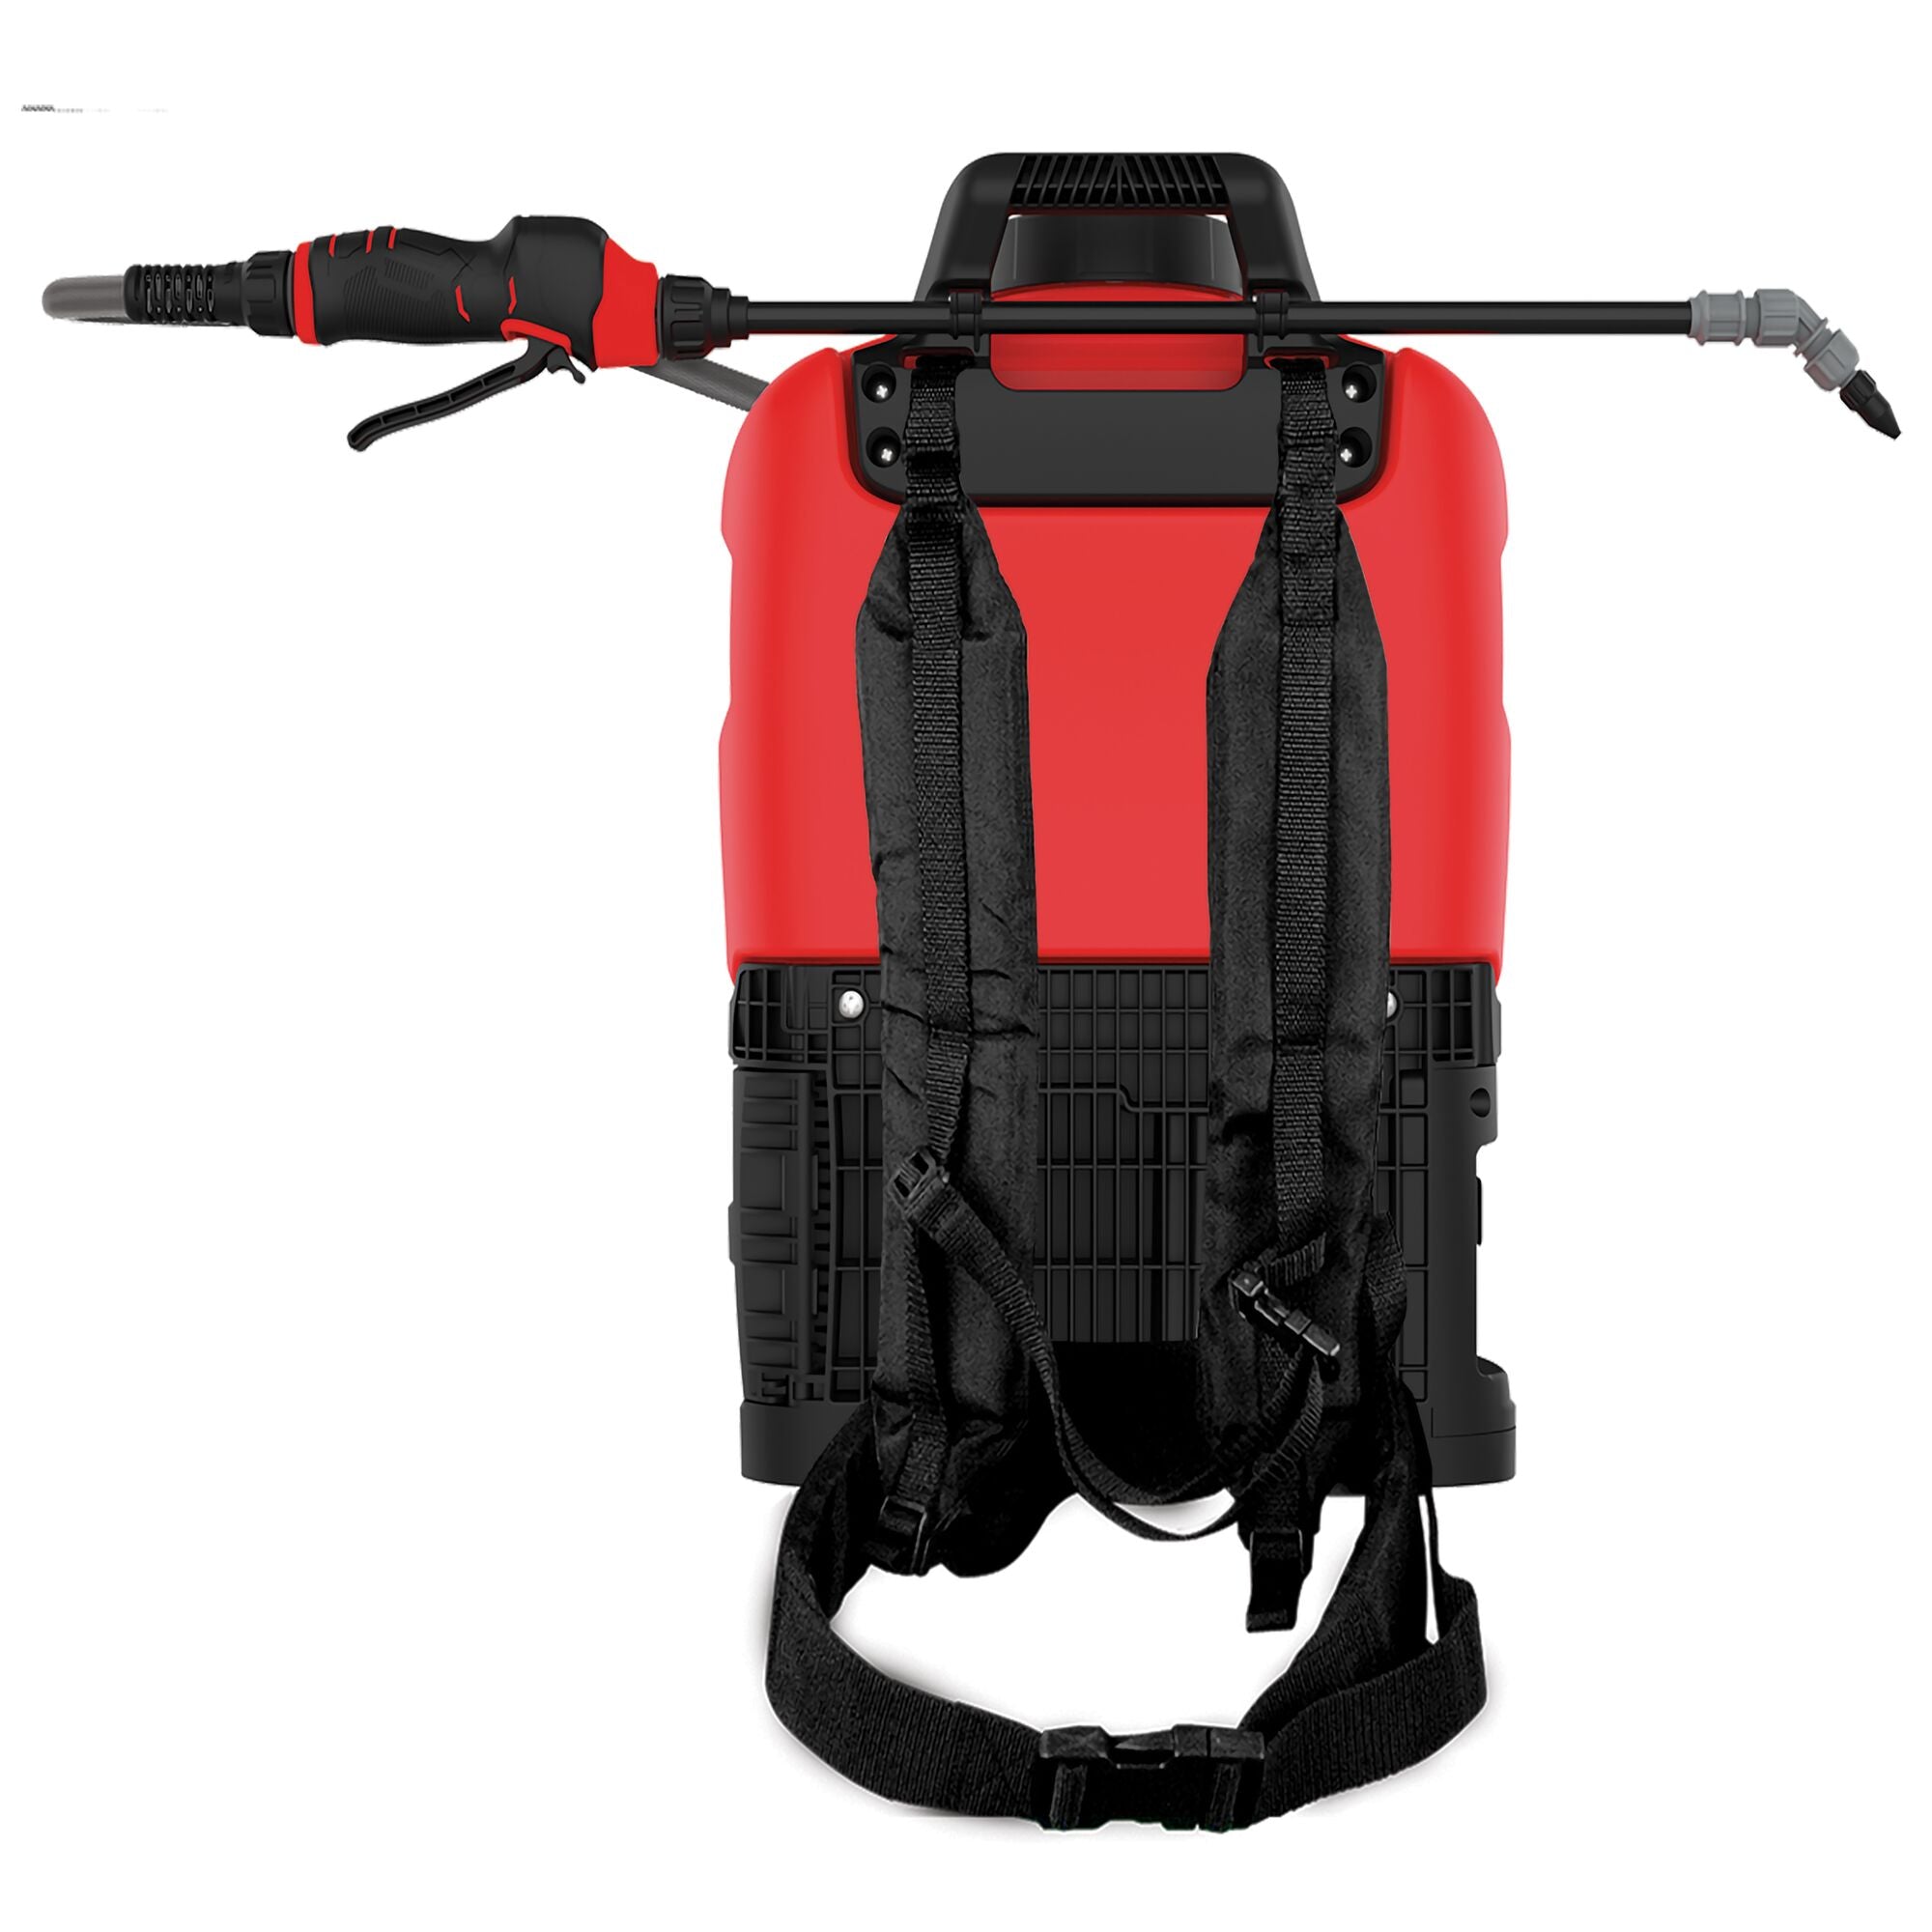 20V Battery Powered Backpack Sprayer battery is protected by a sealed and water resistant compartment.